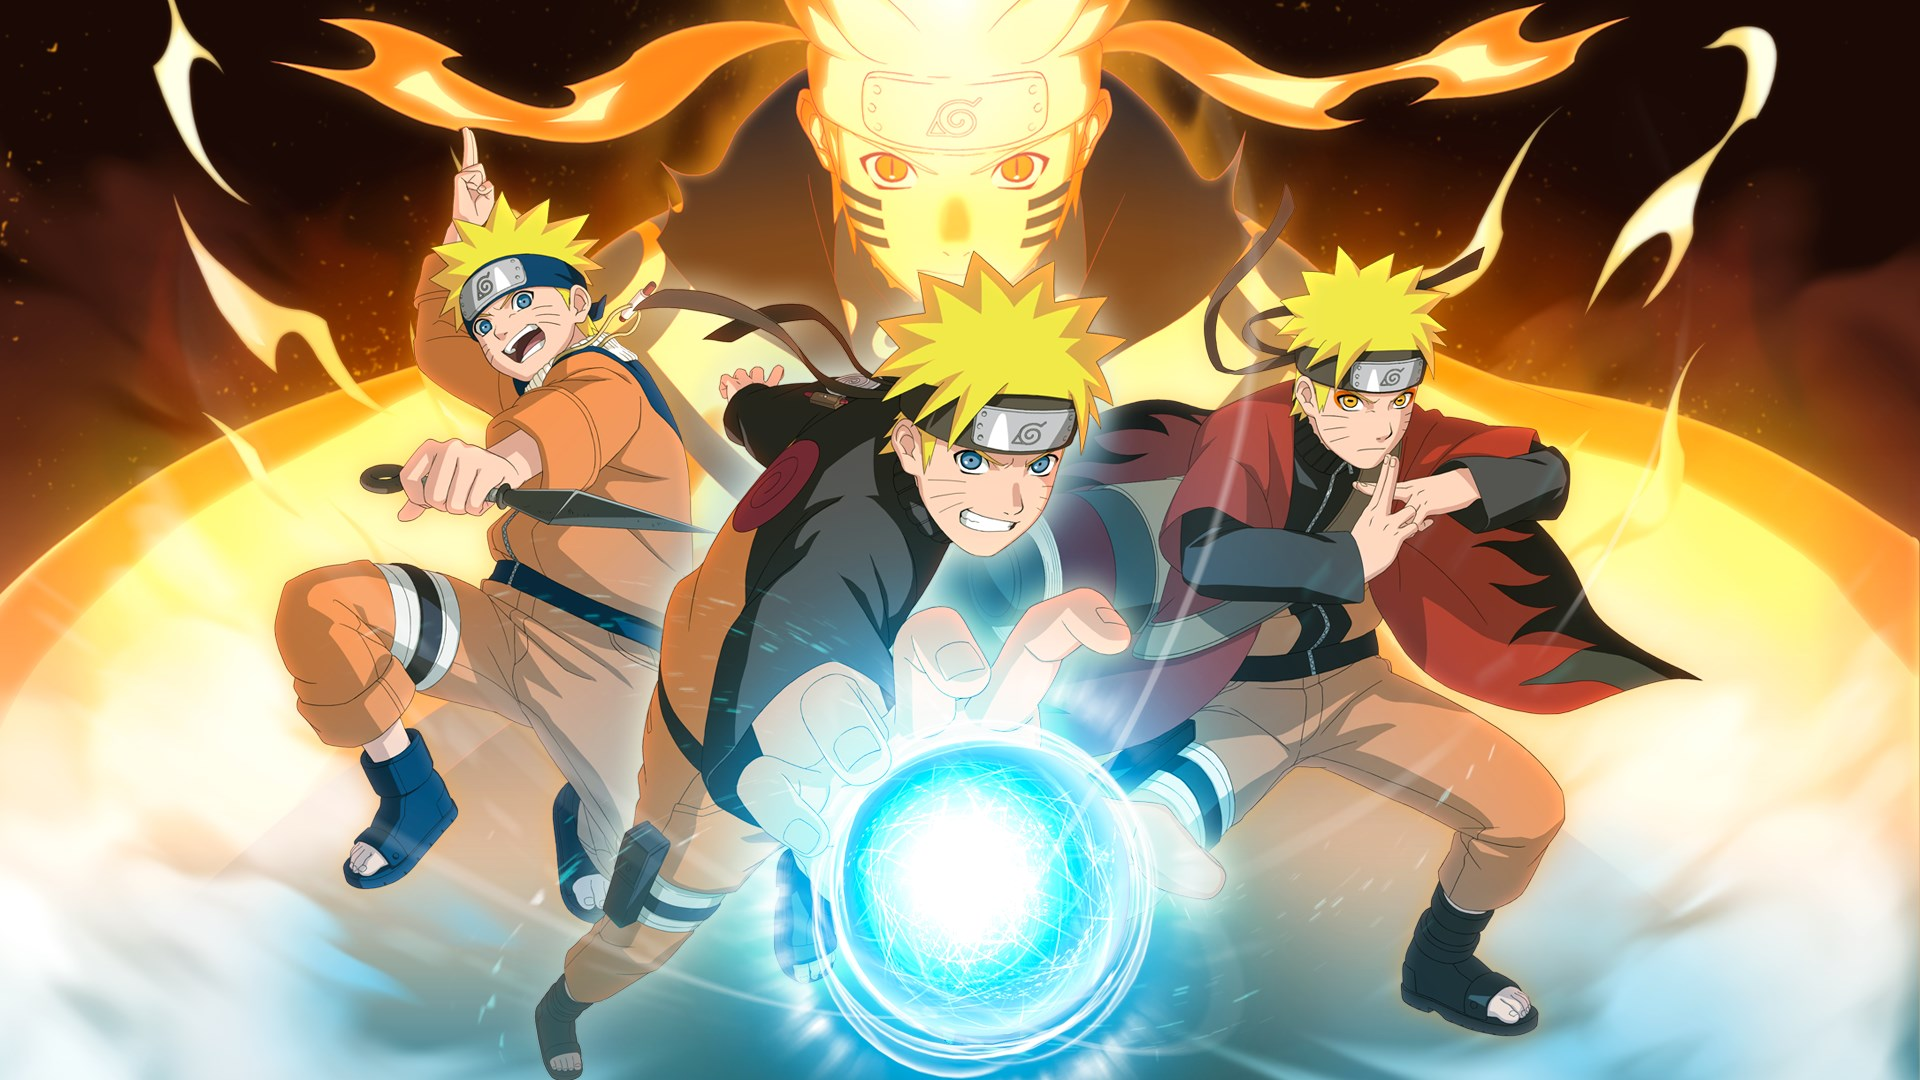 Multiple Narutos are shown in front of a flaming background.